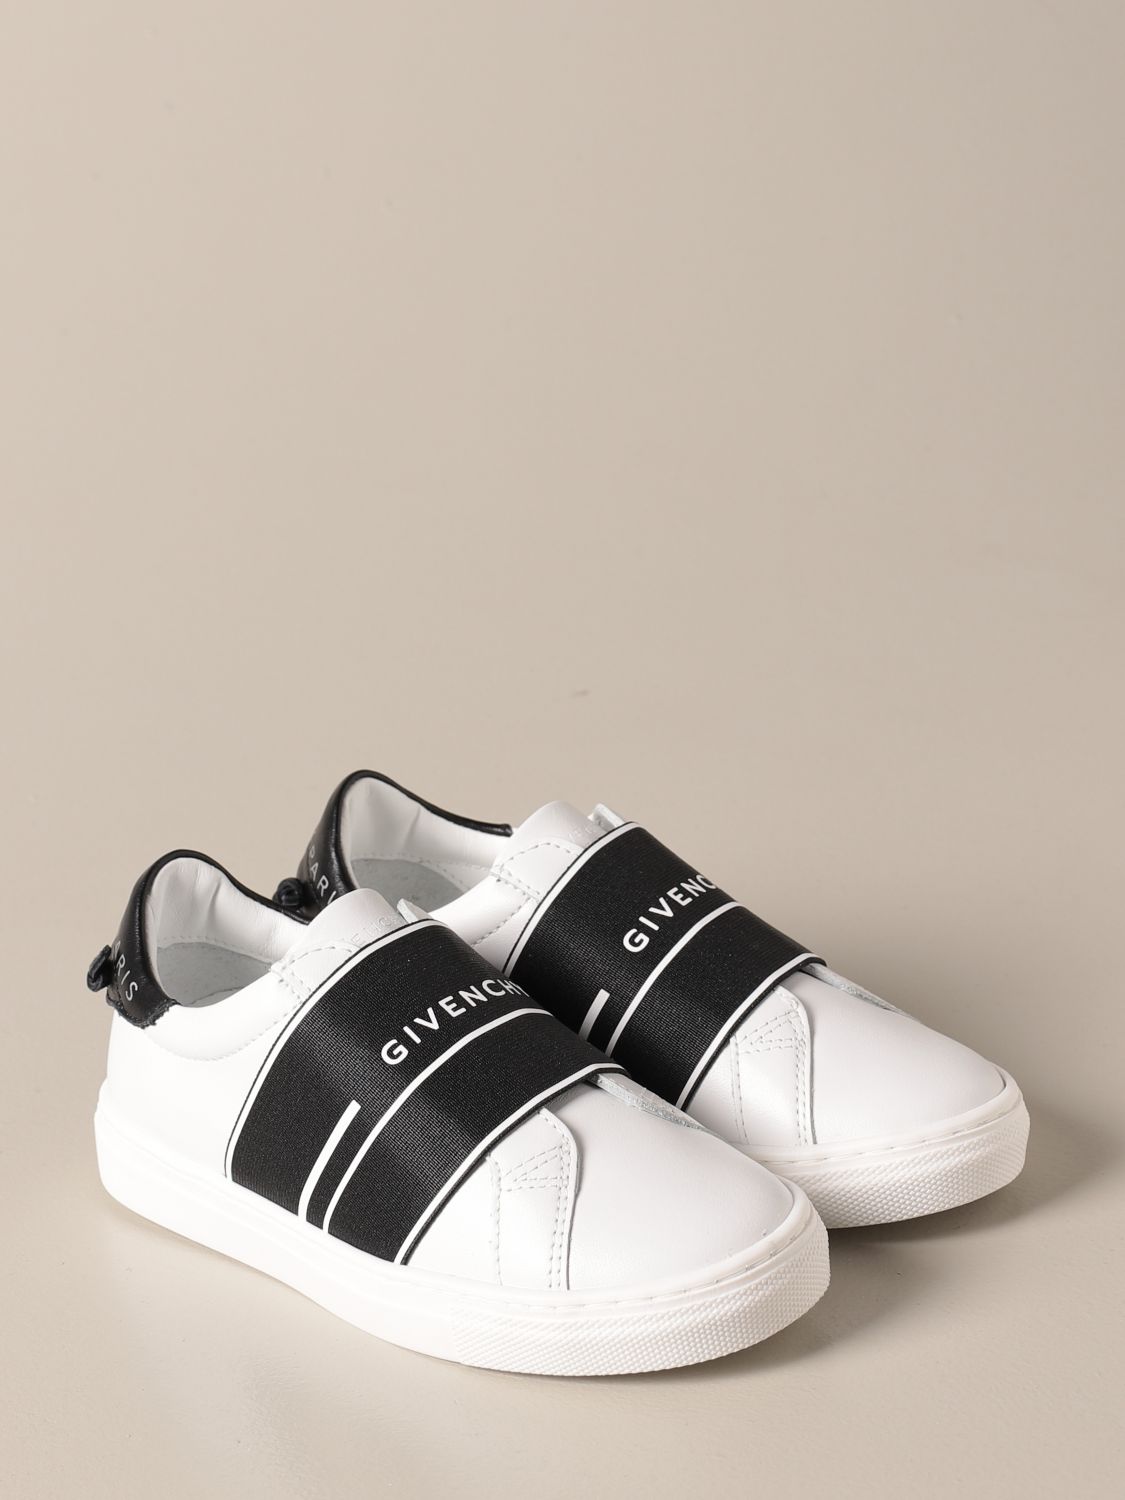 givenchy slip on shoes